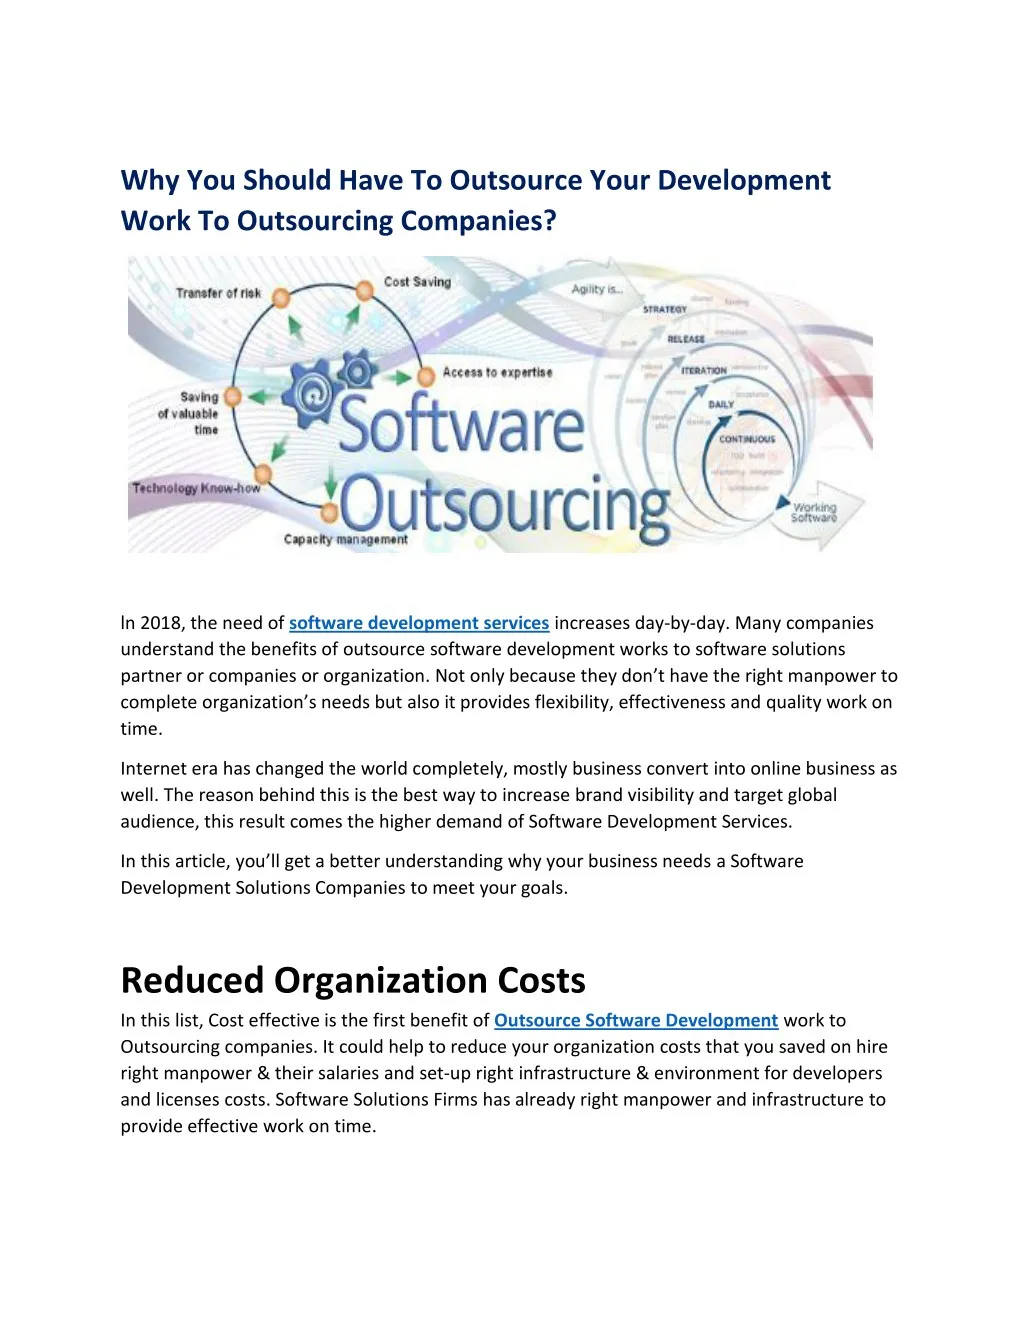 why you should have to outsource your development